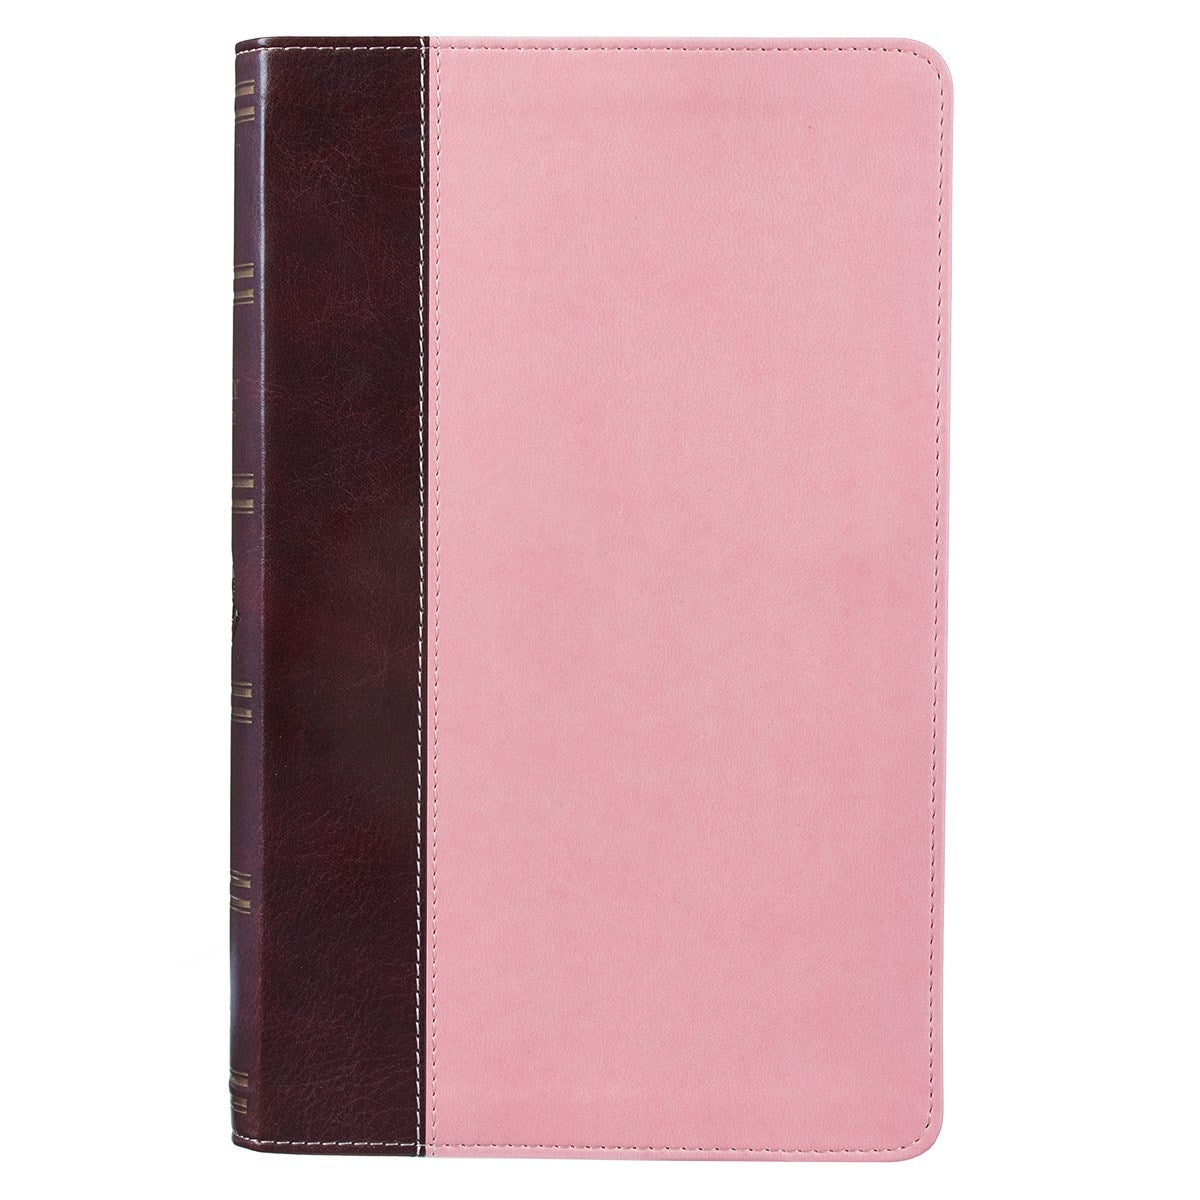 Seed of Abraham Christian Bookstore - (In)Courage - KJV Giant Print Bible-Dark Brown/Pink LuxLeather